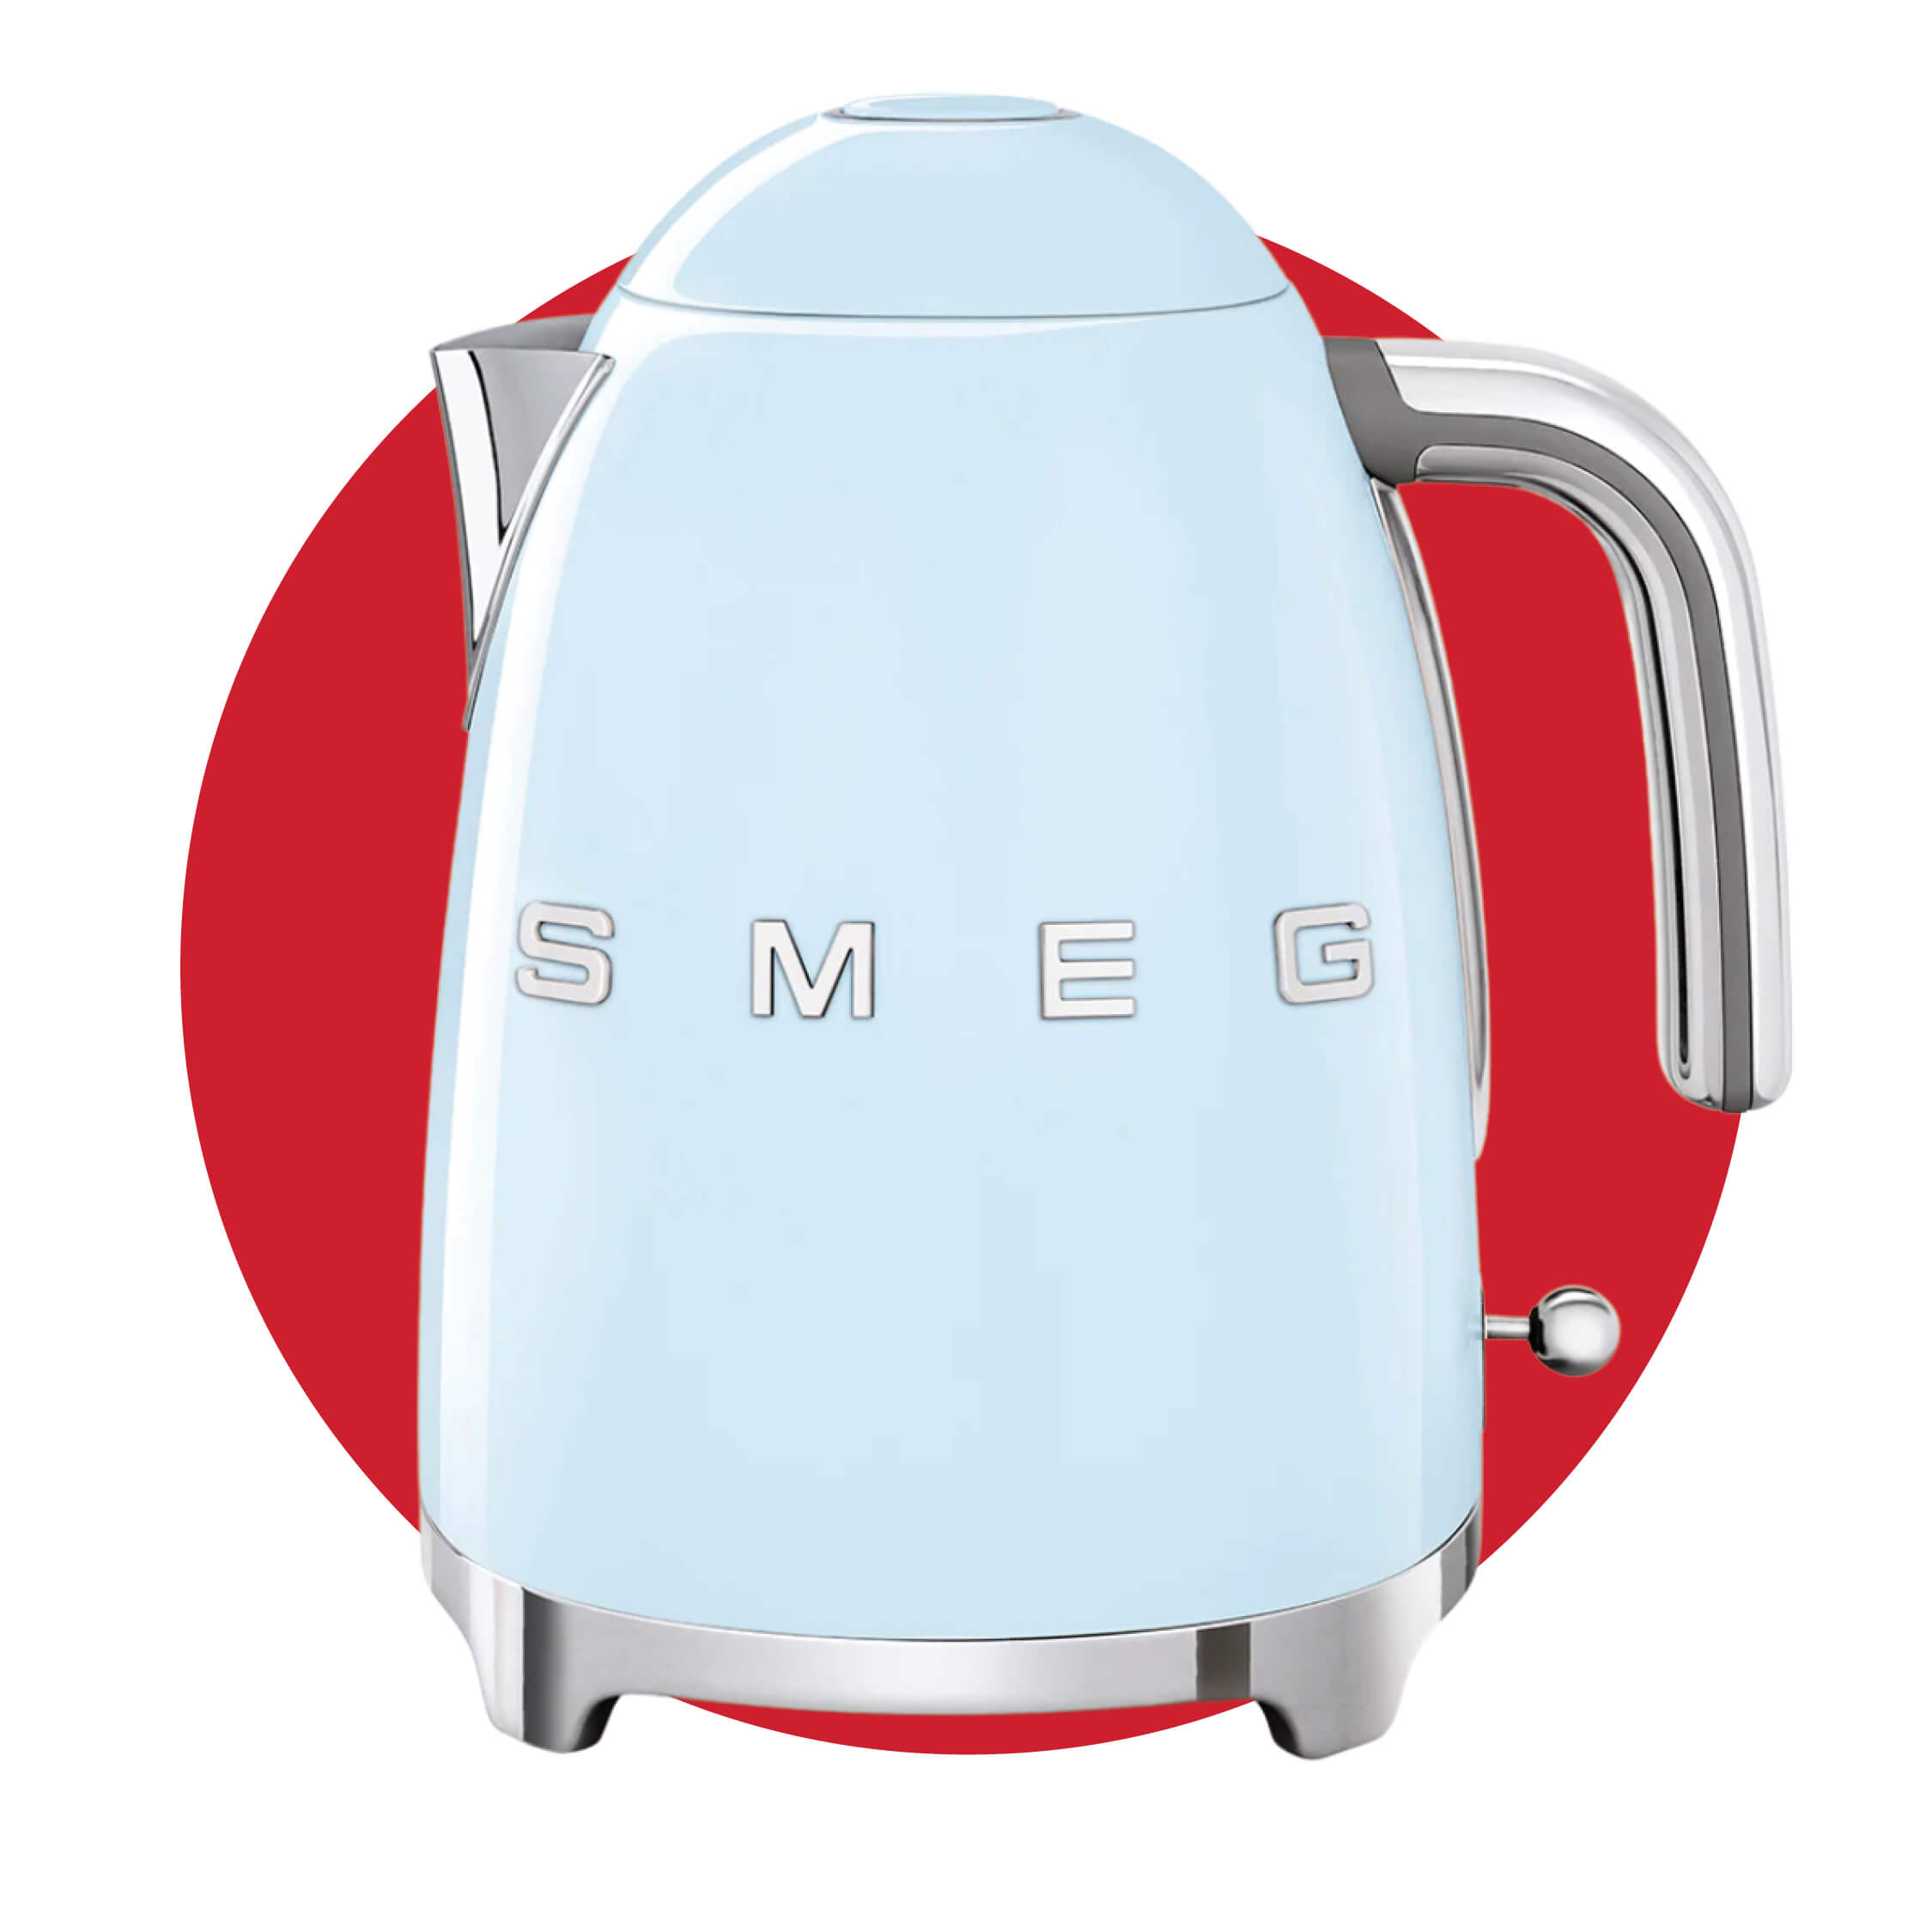 A light blue kettle on a red circle